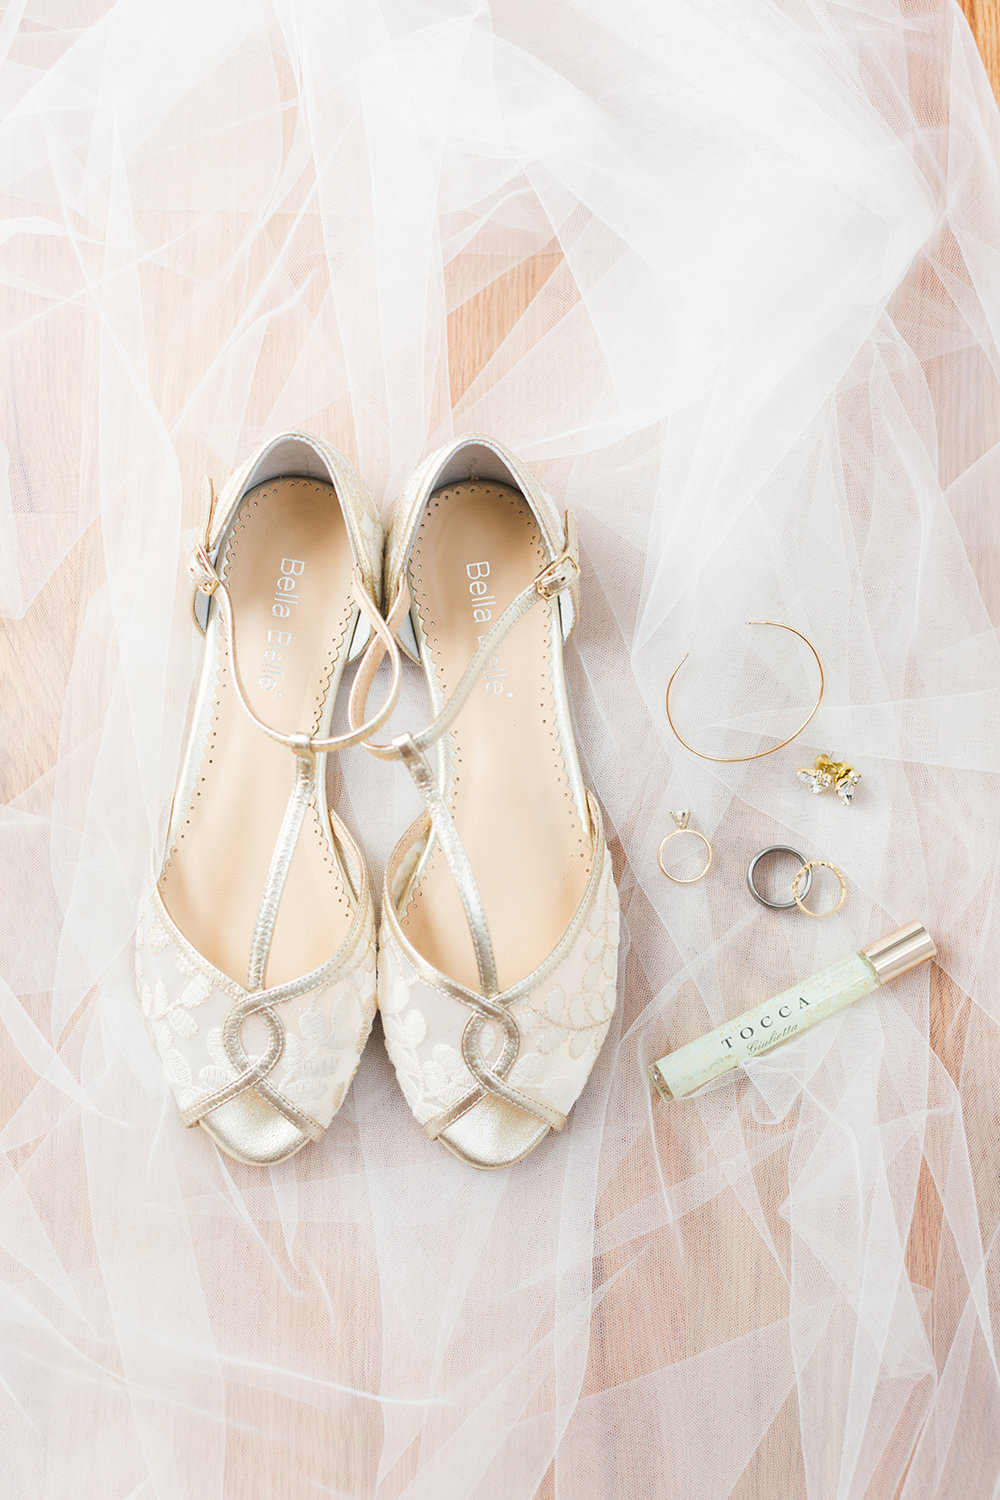 Real Wedding Shoes from Real Brides. Desktop Image